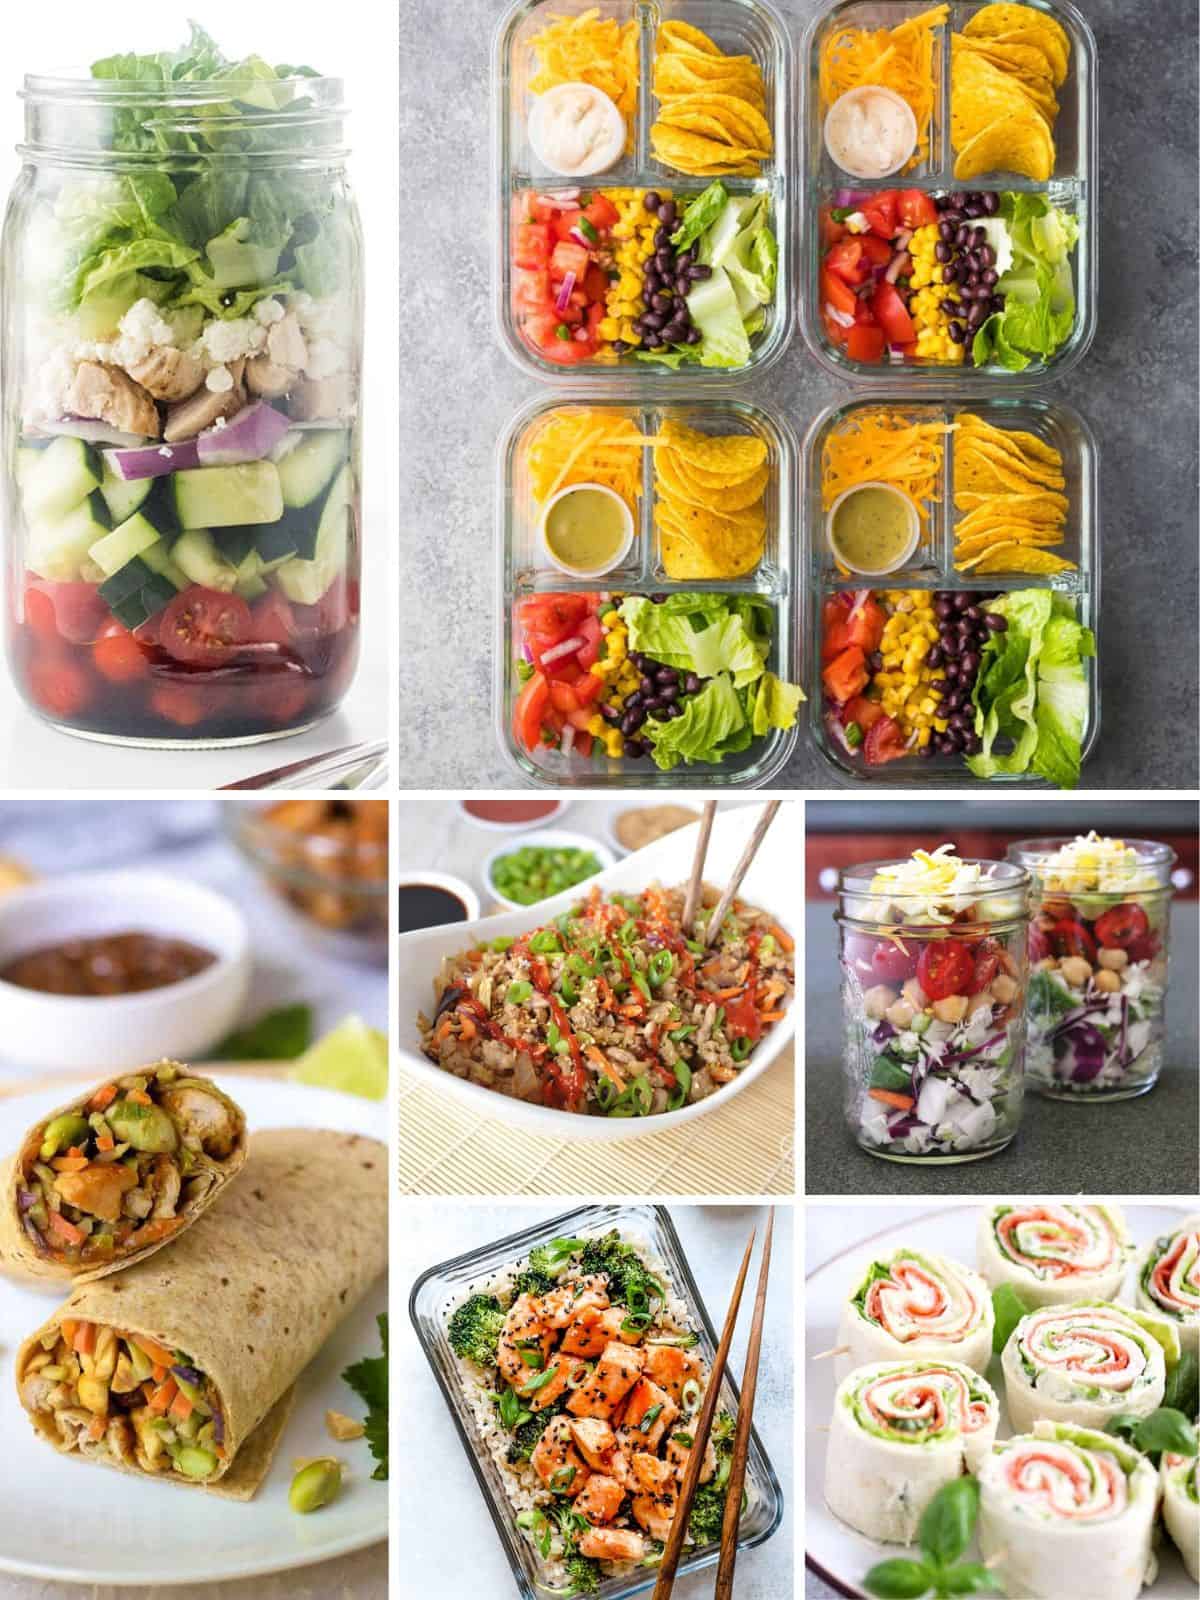 7 portable meals to enjoy for weekly meal plan.